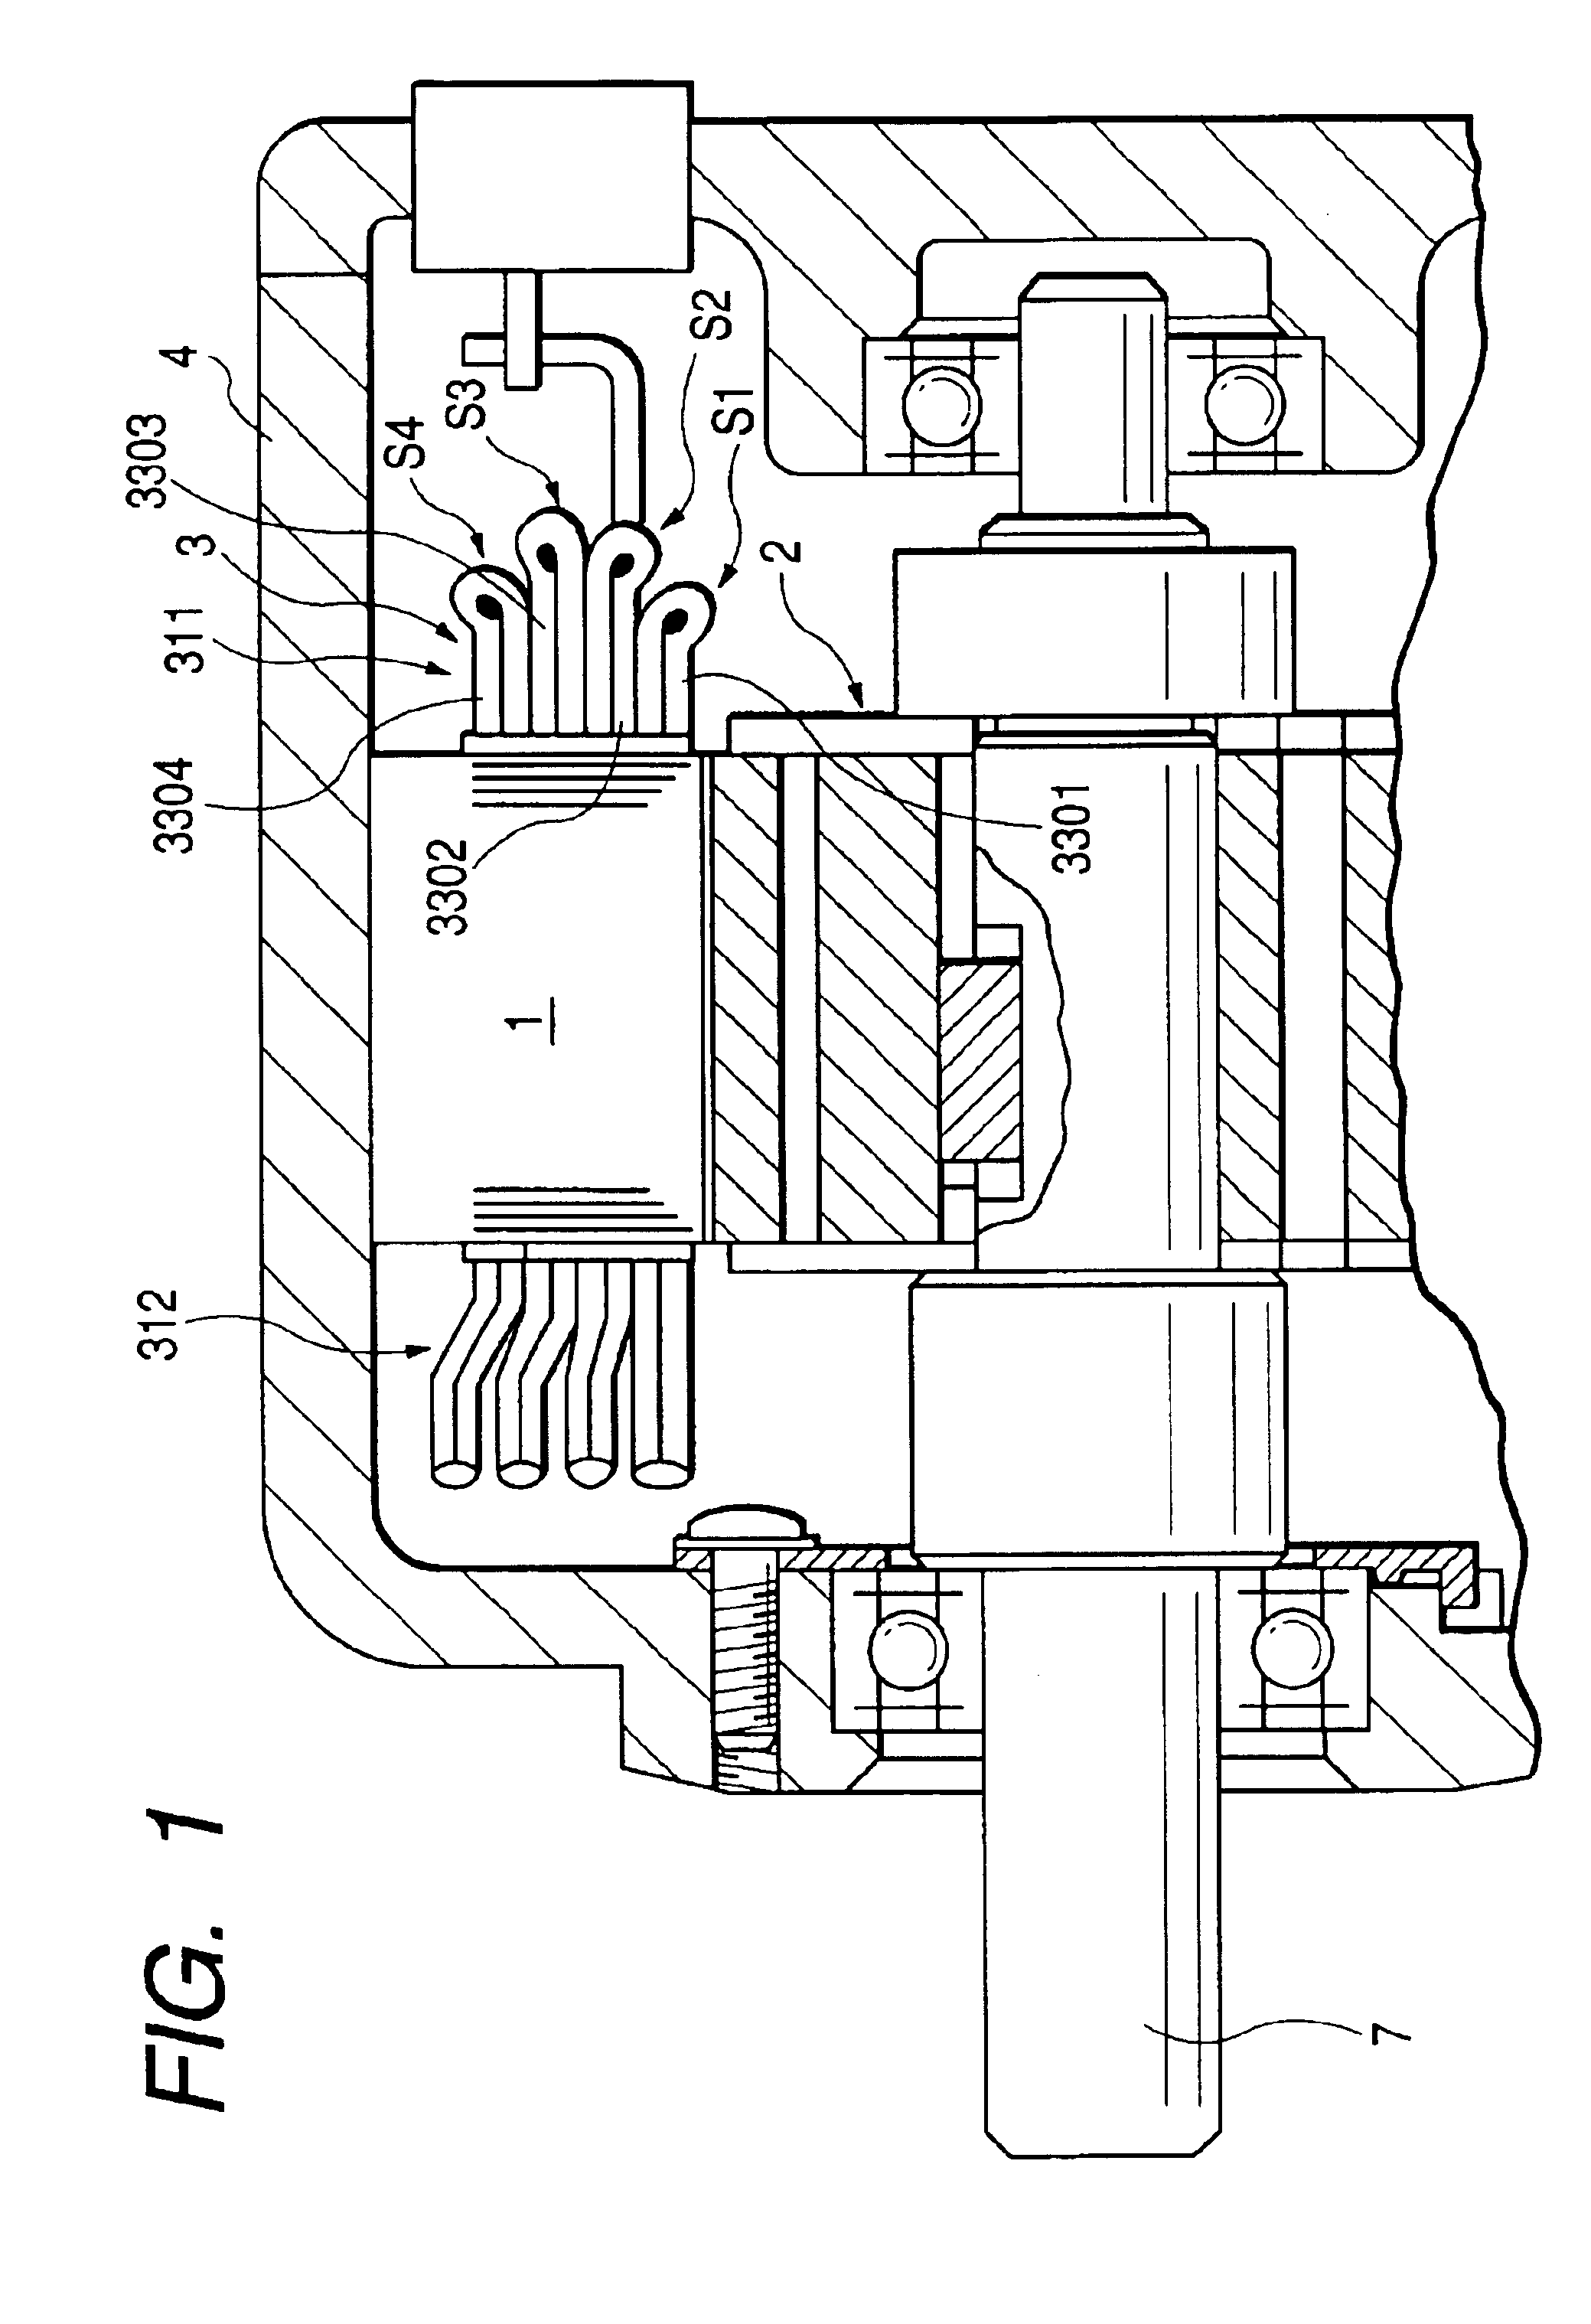 Stator coil made of joined conductor segments for rotary electric machinery and method for manufacturing the same